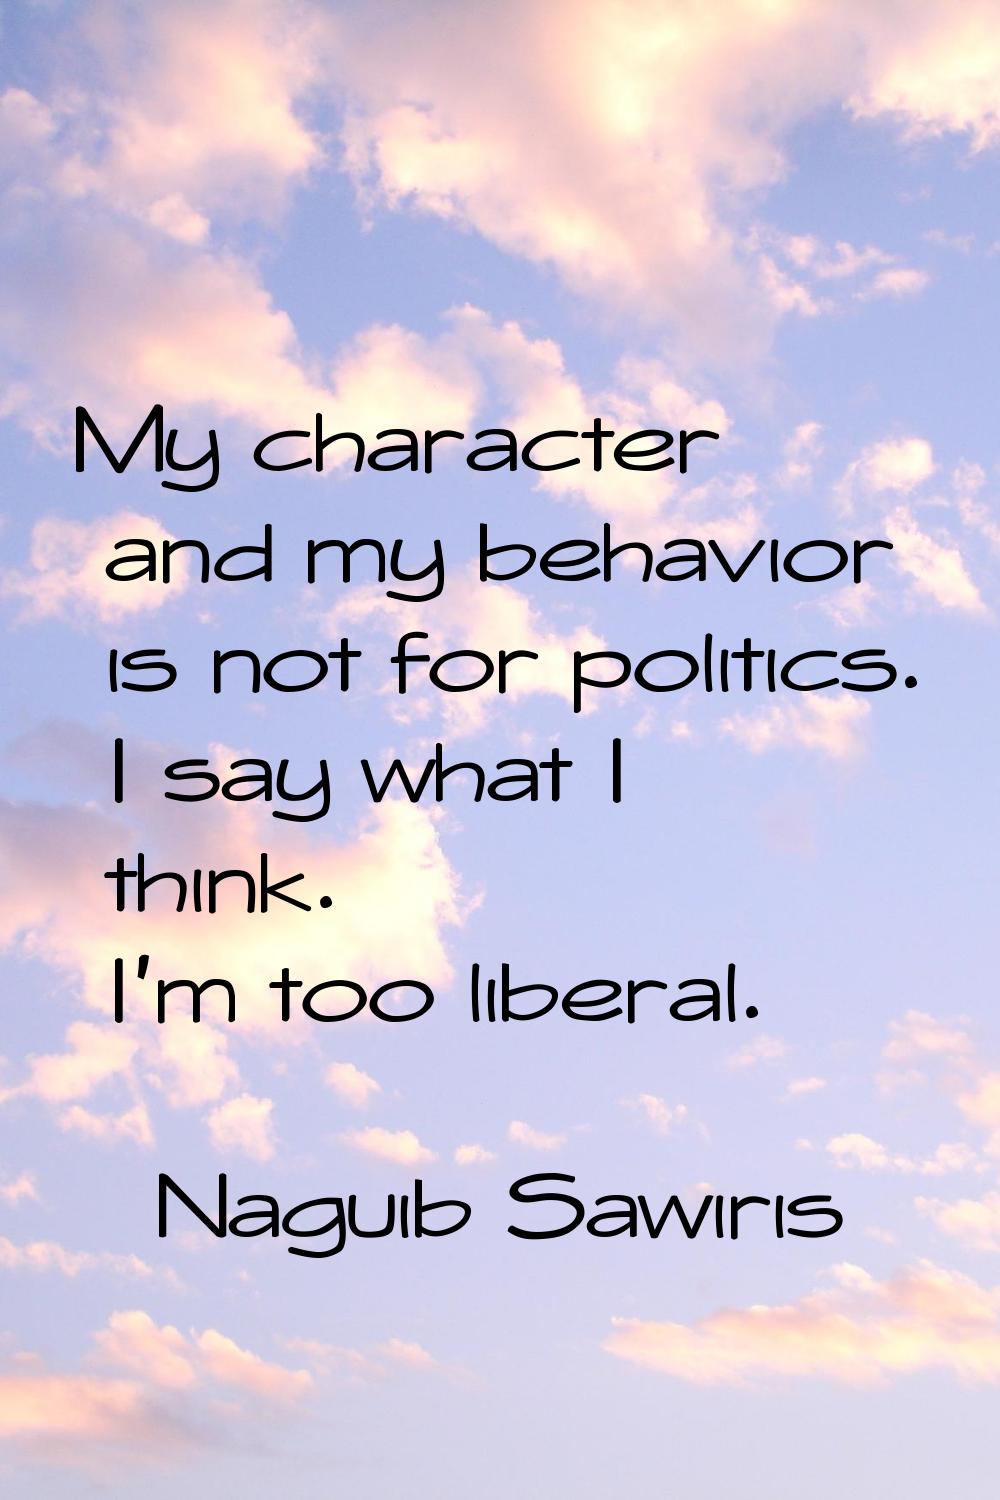 My character and my behavior is not for politics. I say what I think. I'm too liberal.